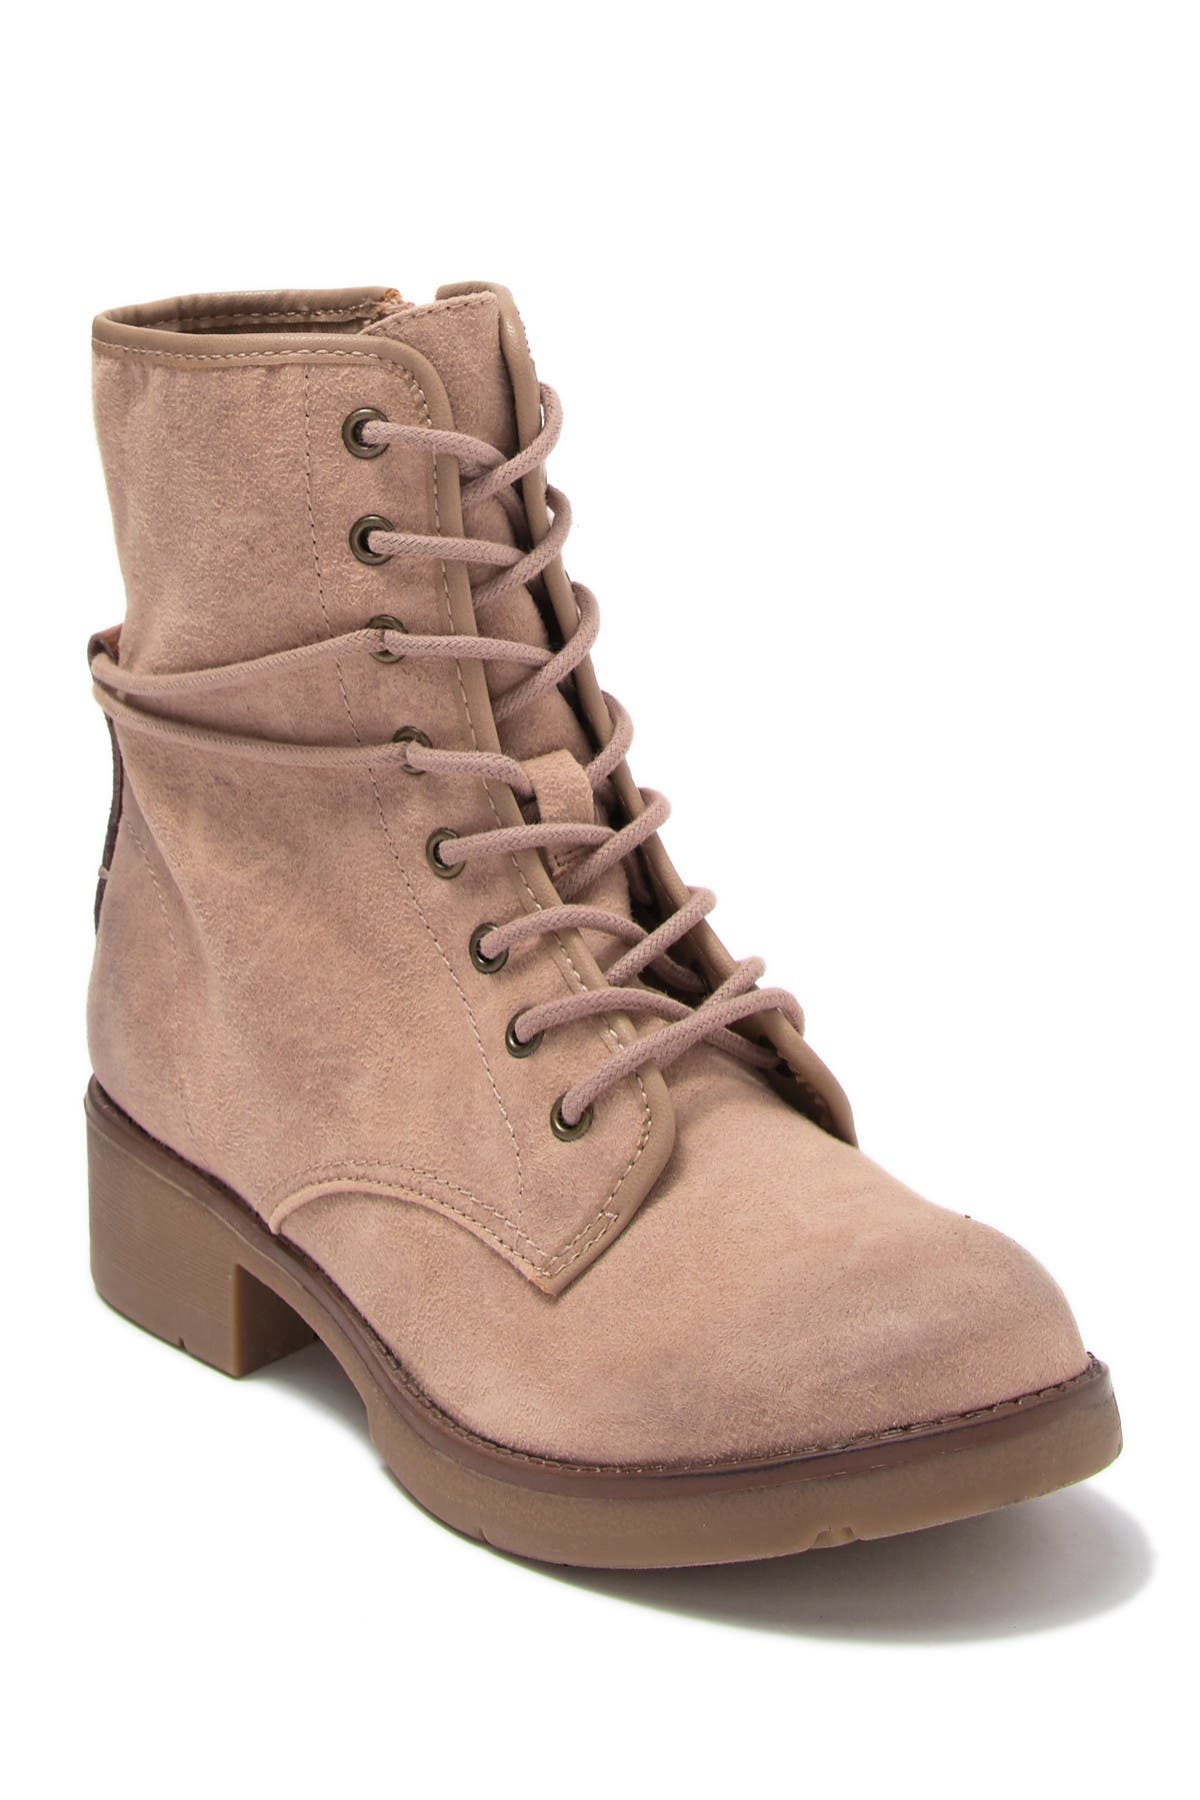 Rock \u0026 Candy | Hurley Lace-Up Boot 